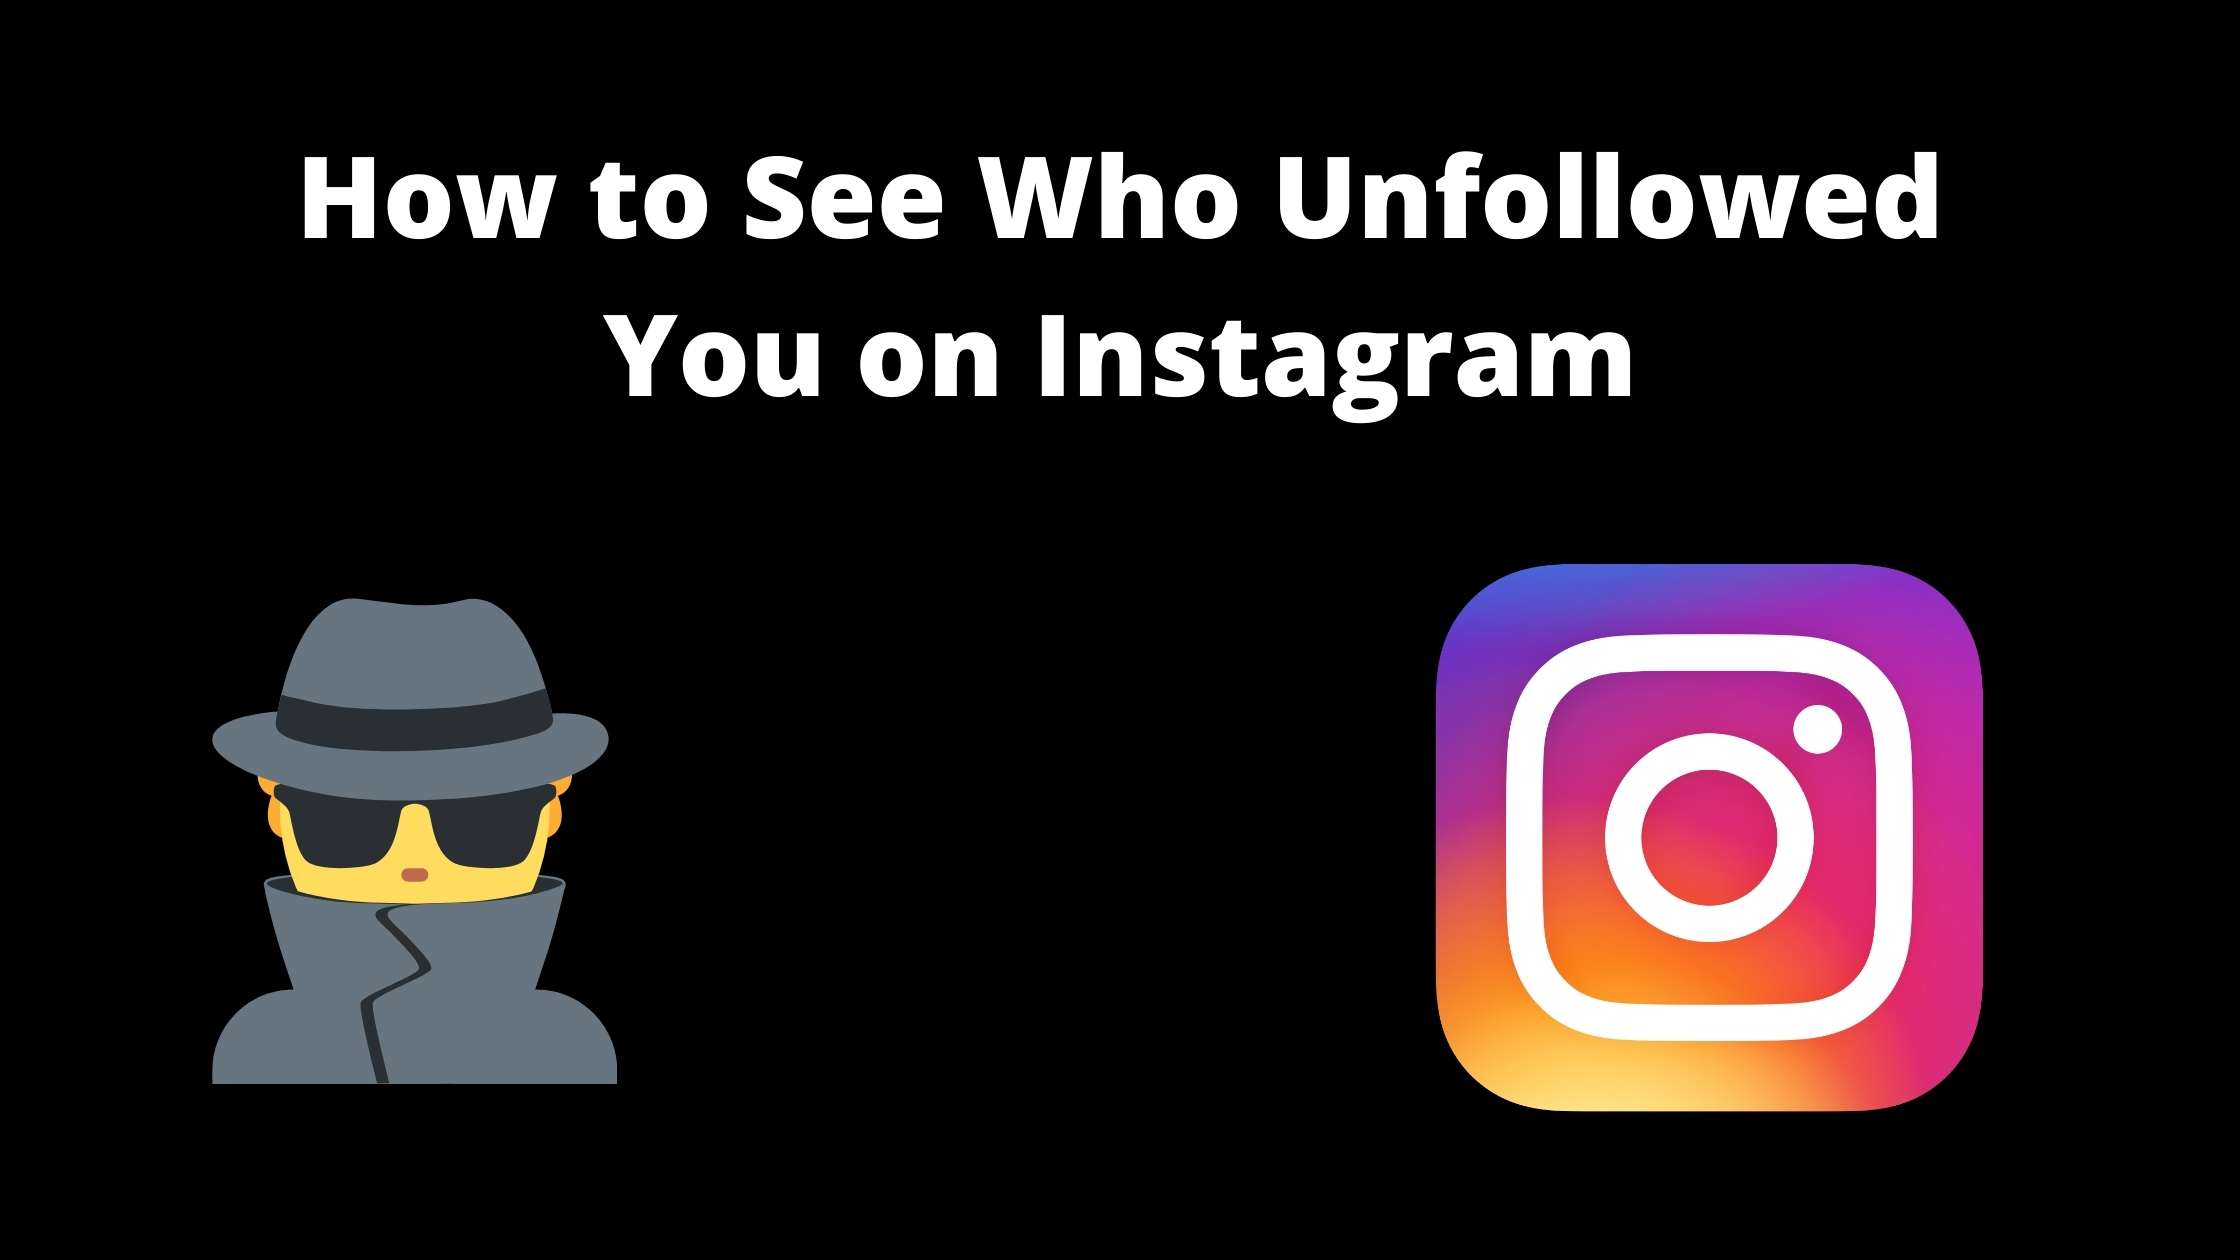 how to see who unfollowed you on Instagram